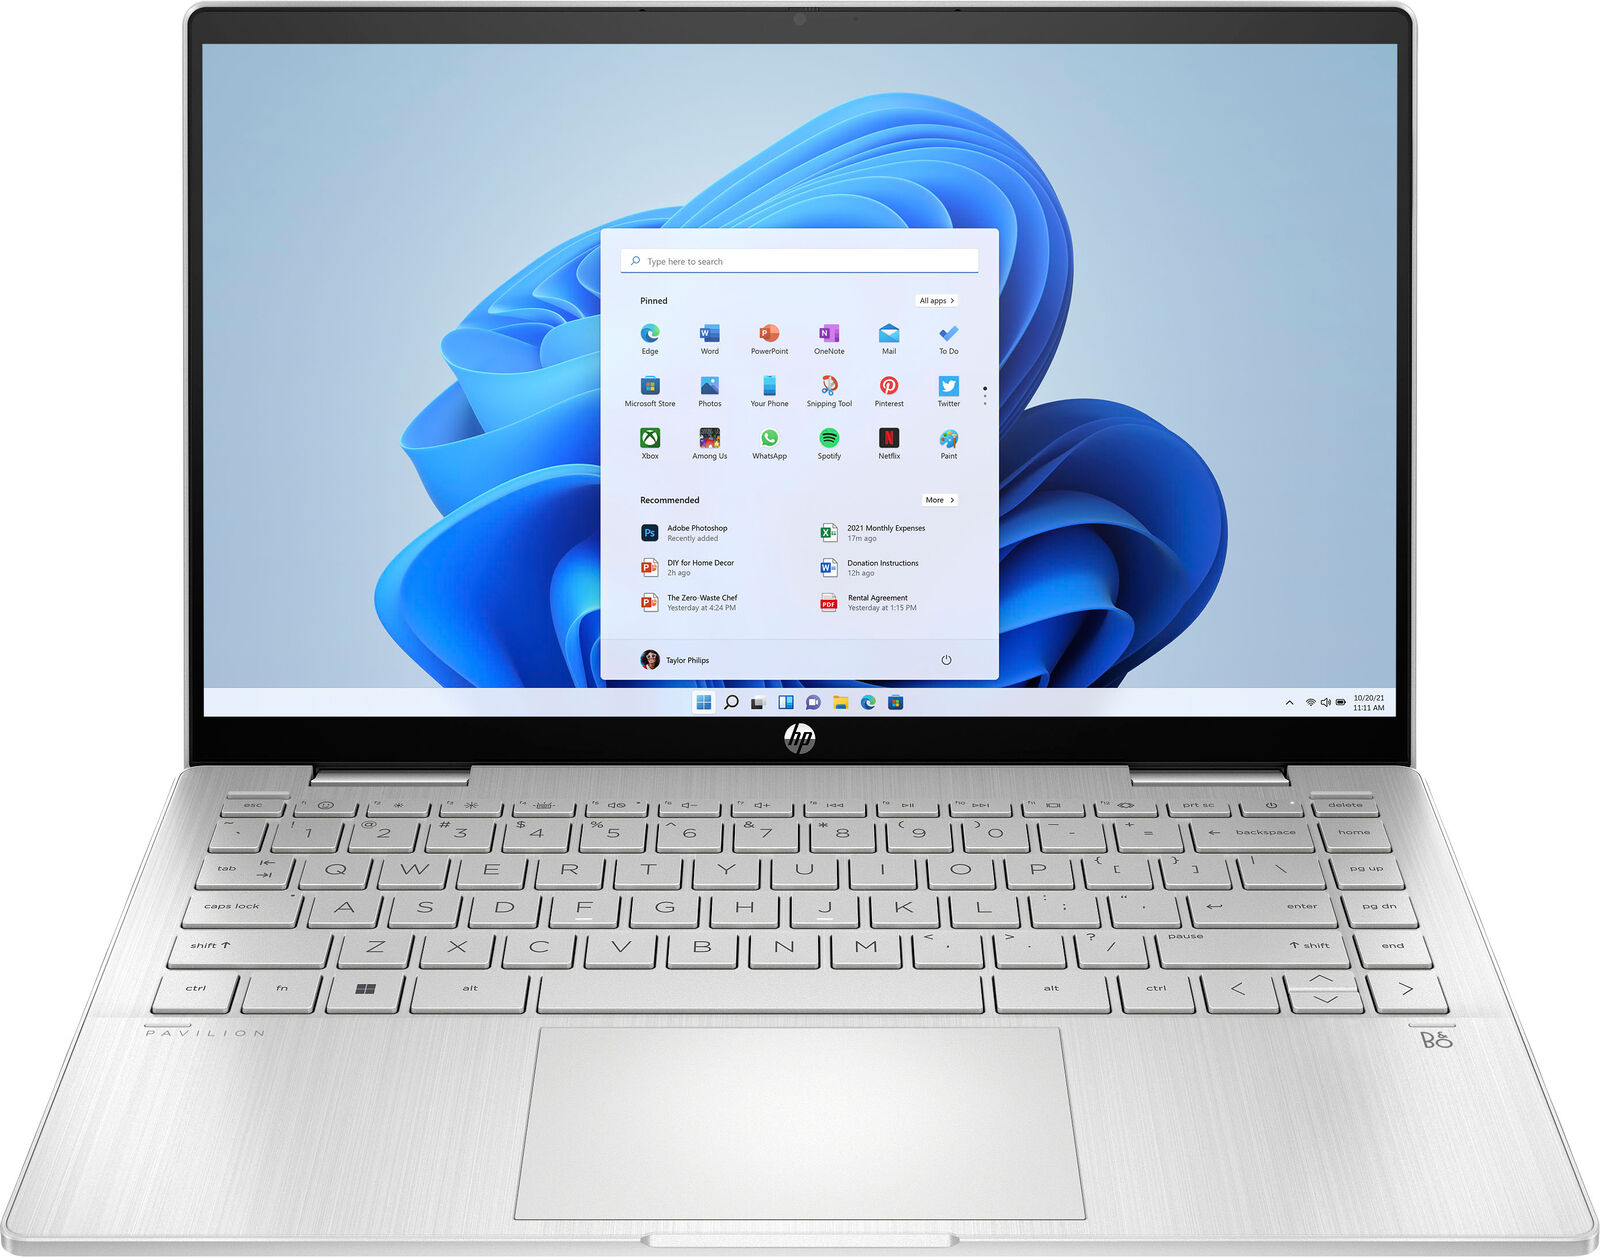 HP - Pavilion x360 2-in-1 14" Touch-Screen Laptop - Intel Core i5 ON SALE AT BEST BUY!